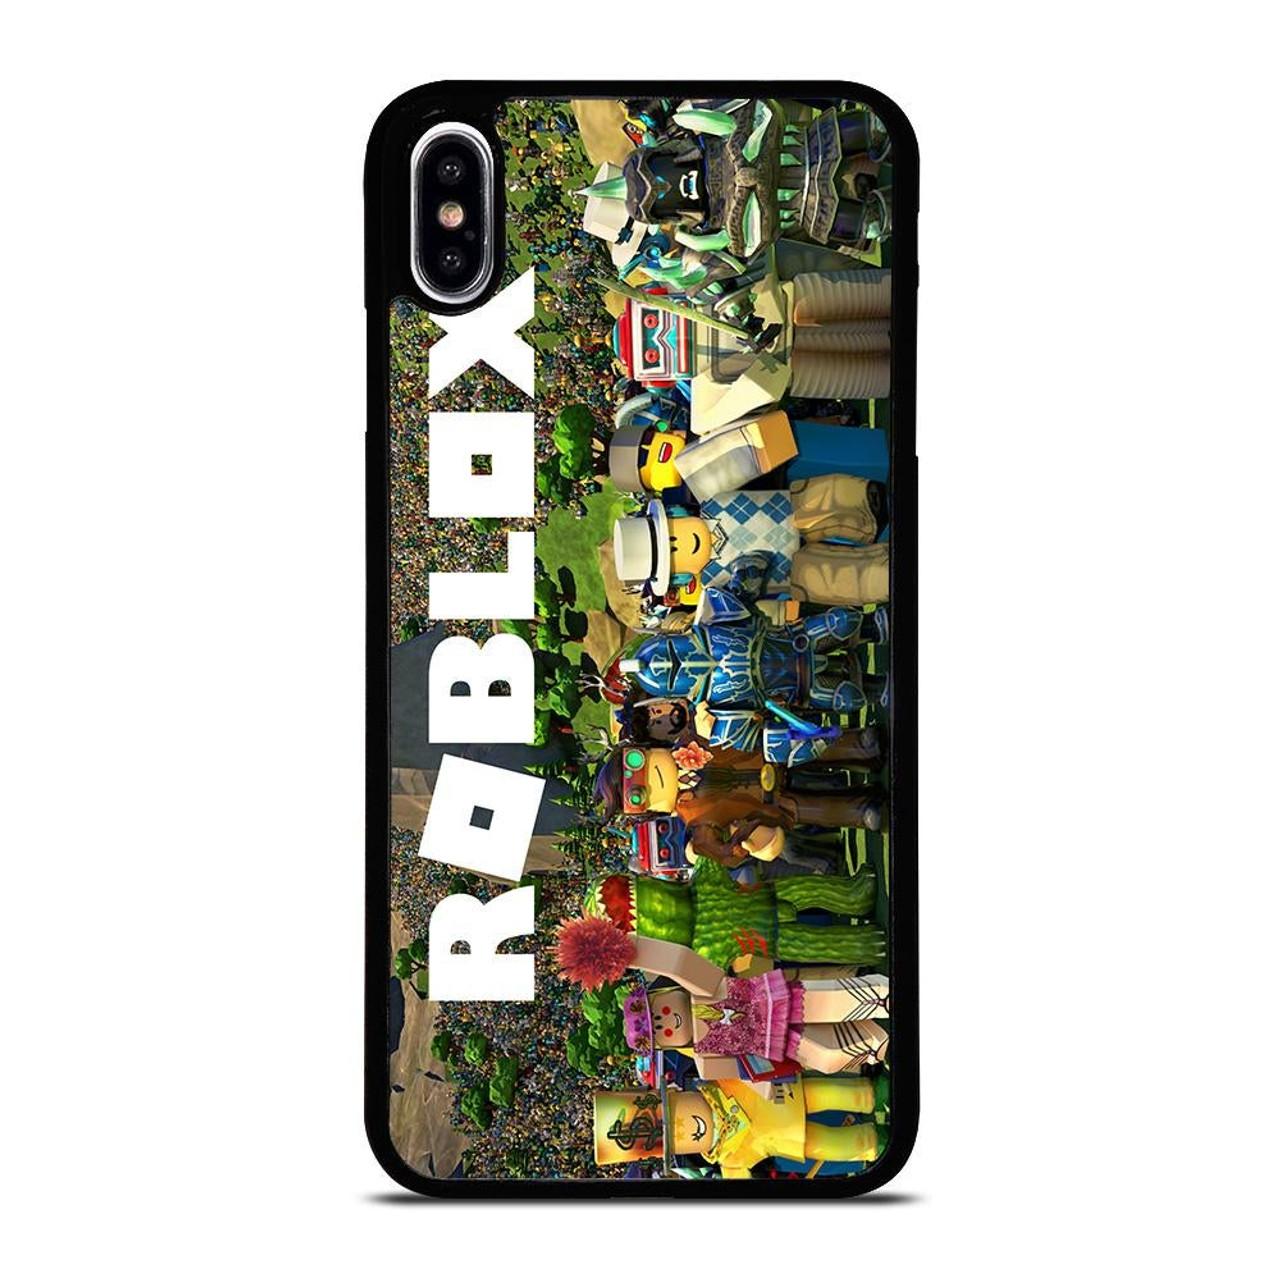 Roblox Gfx iPhone Cases for Sale